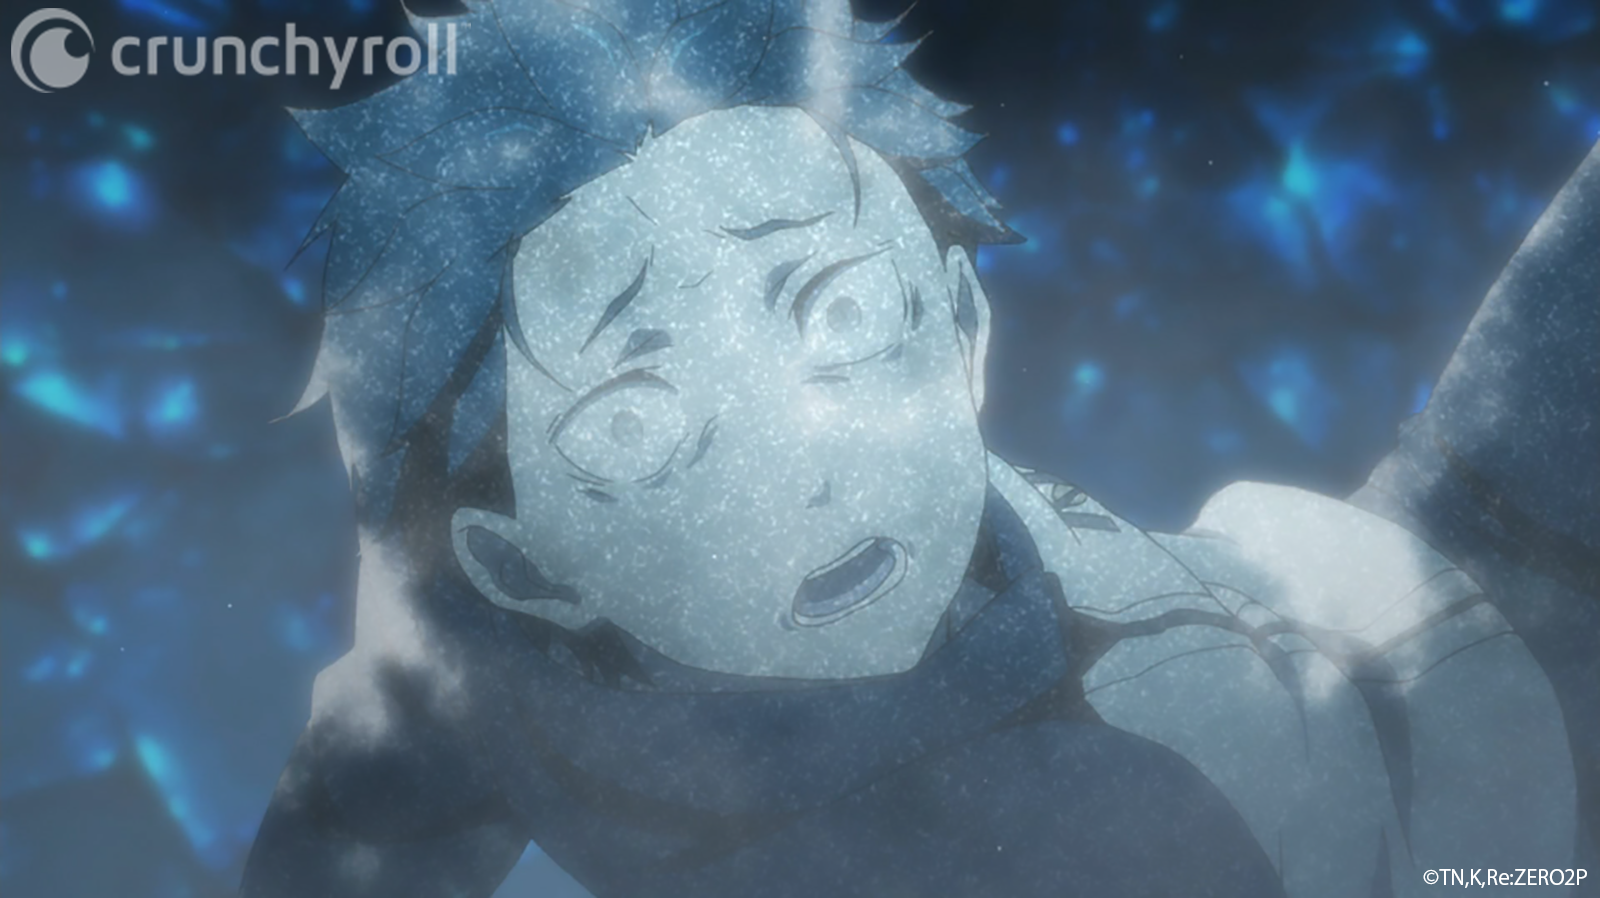 Natsuki Subaru is frozen solid by an unseen force in a scene from the Re:ZERO -Starting Life in Another World- TV anime.